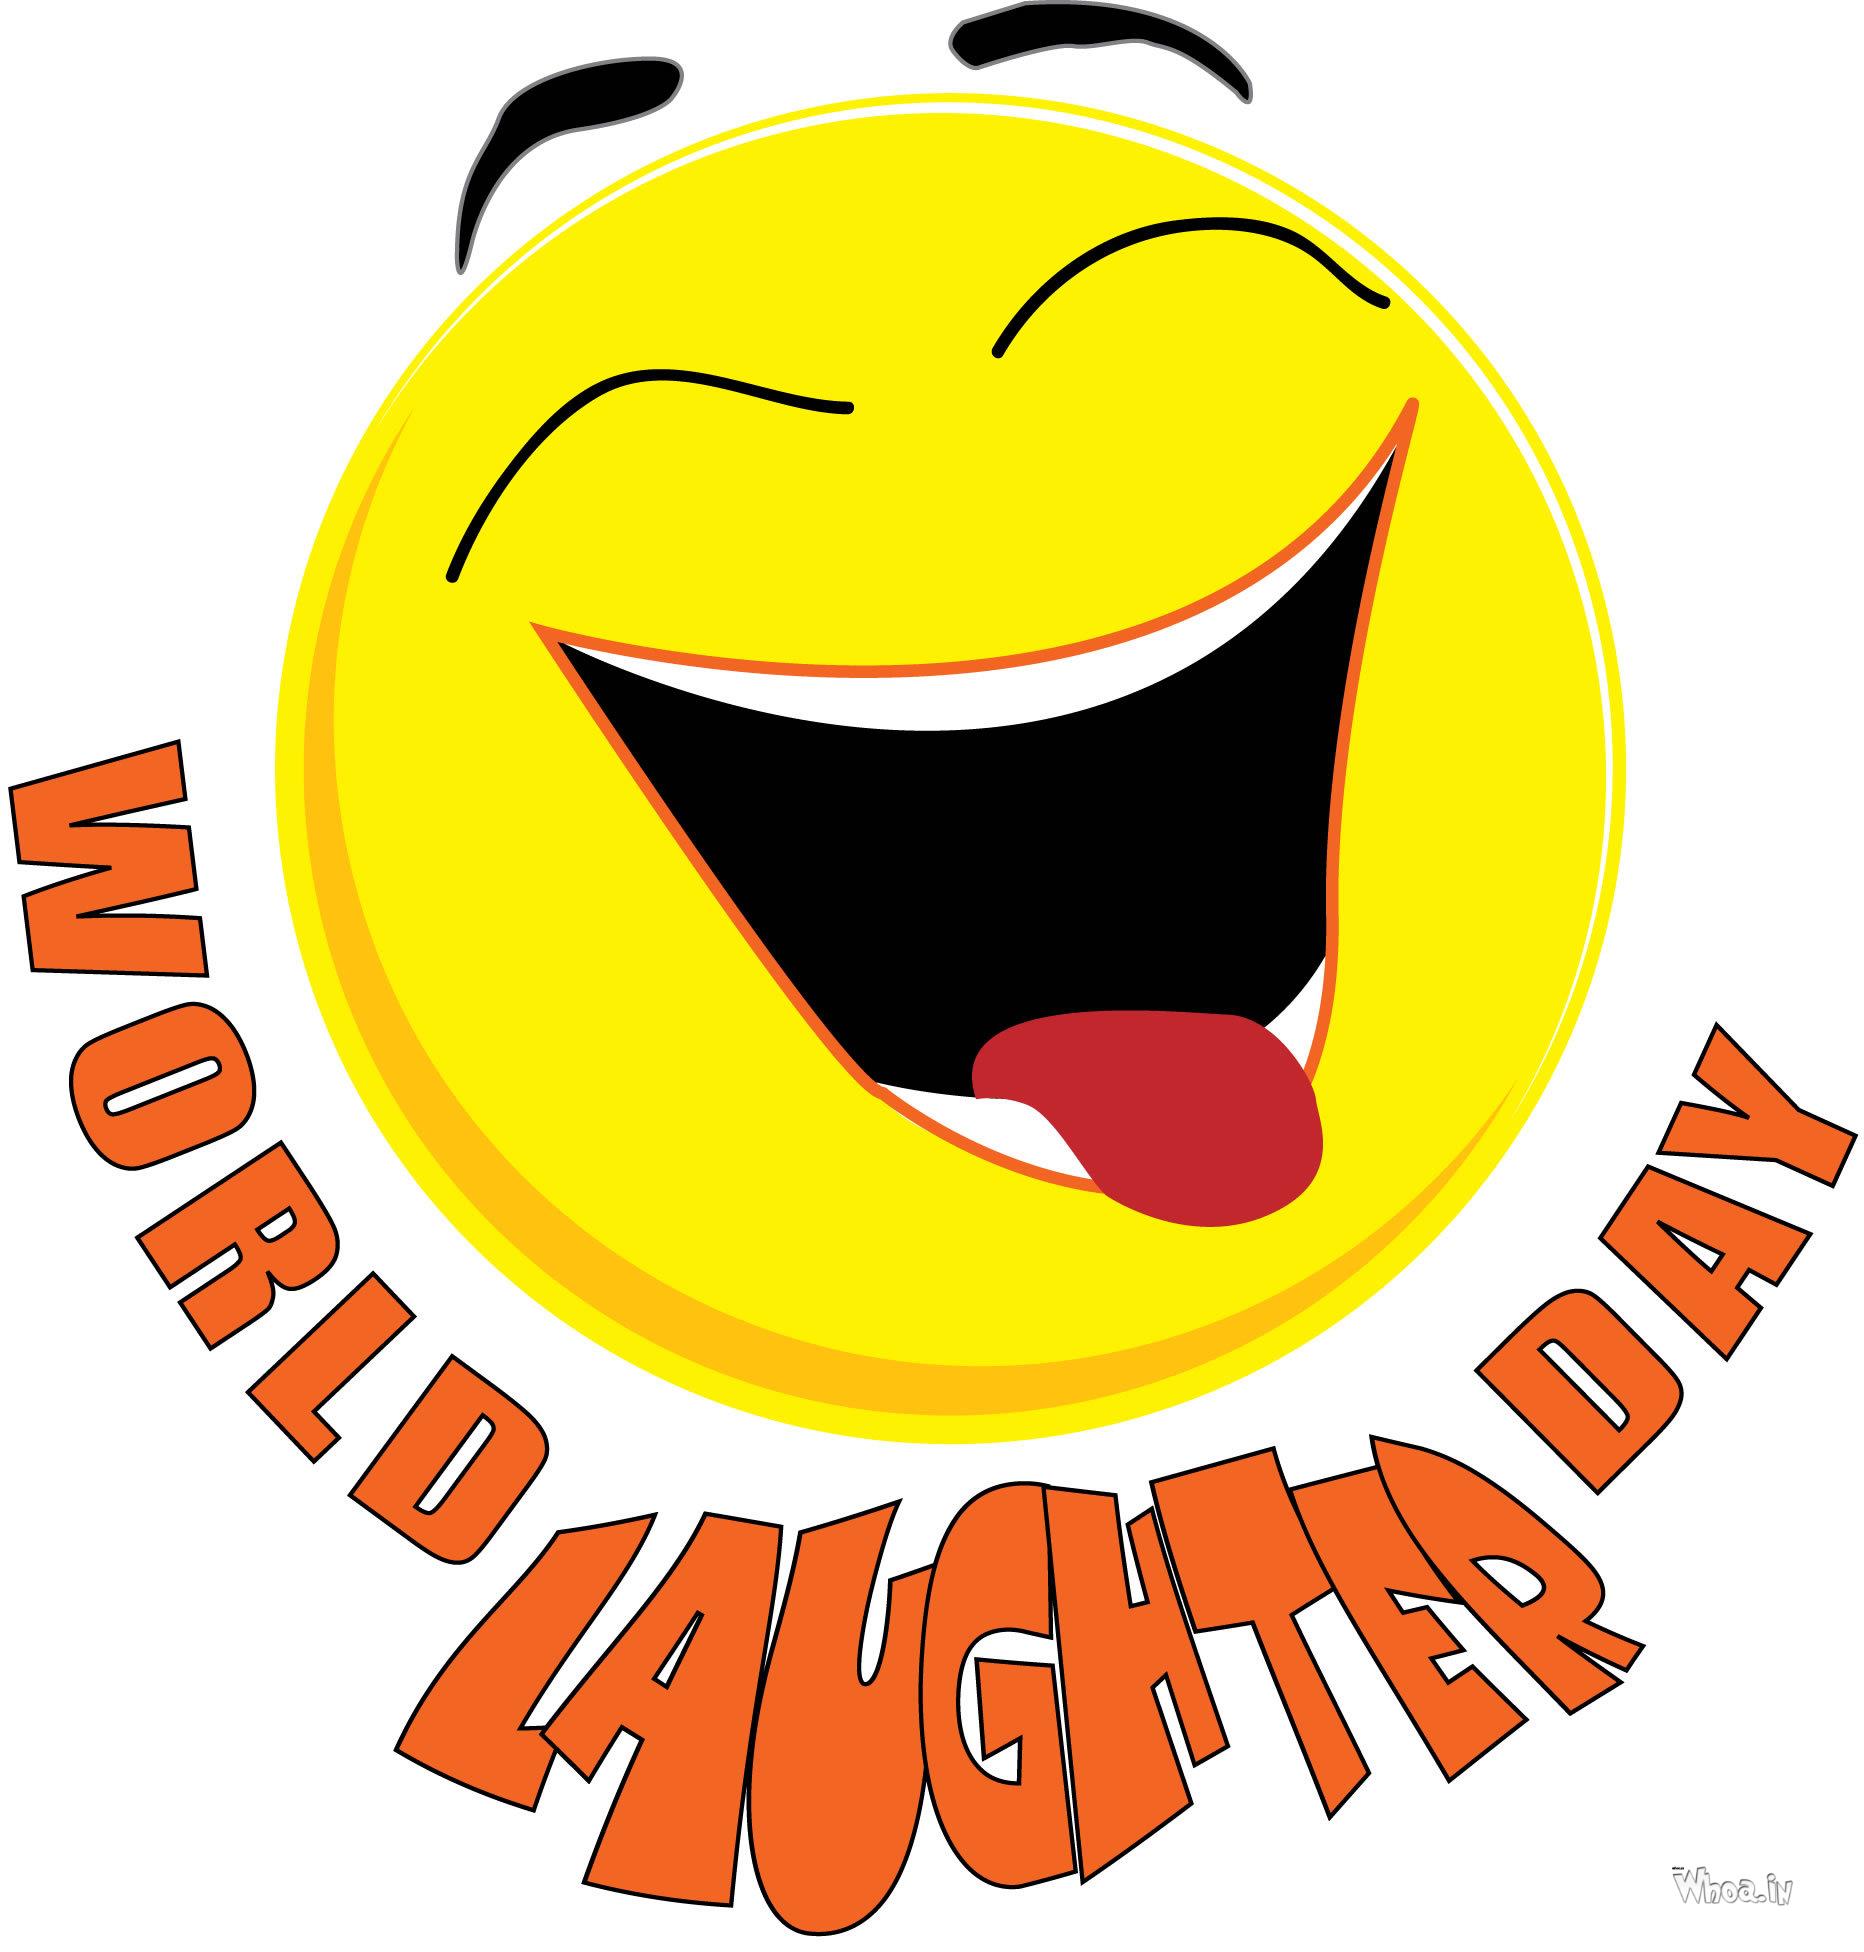 World Laughter Day Greetings Images & Wallpapers Laughter Day